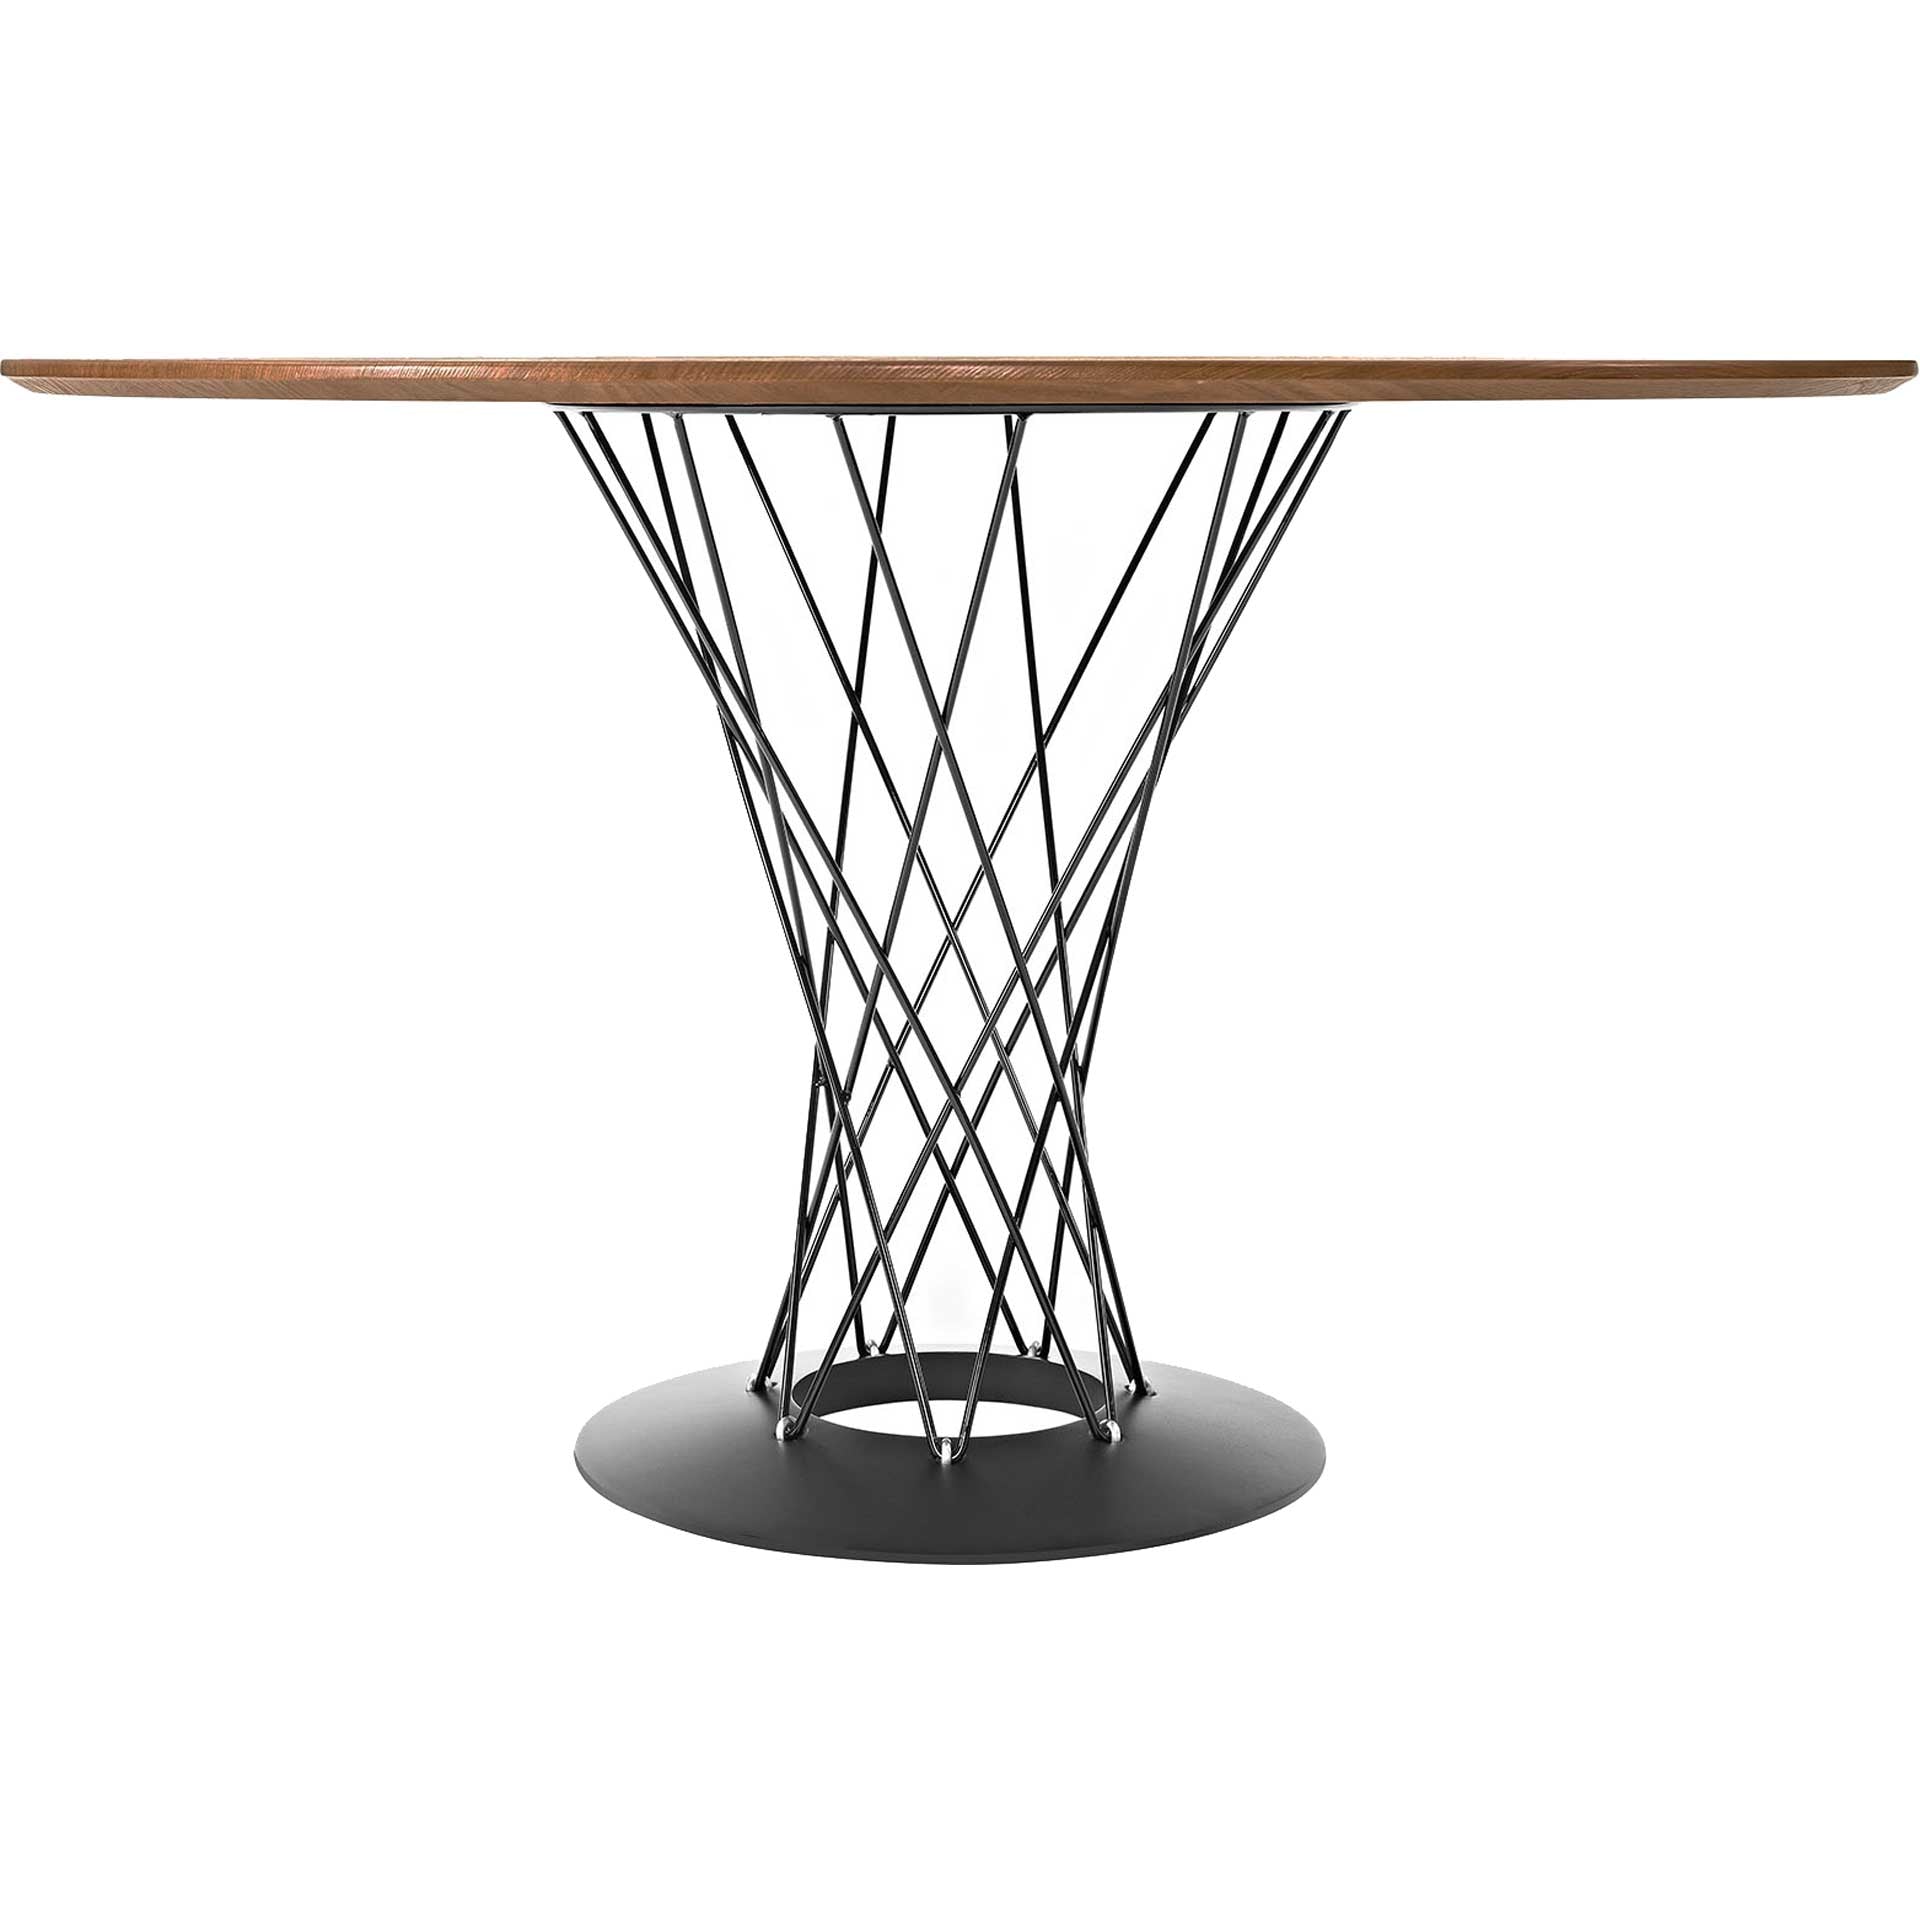 Cycle Stainless Steel Dining Table Walnut